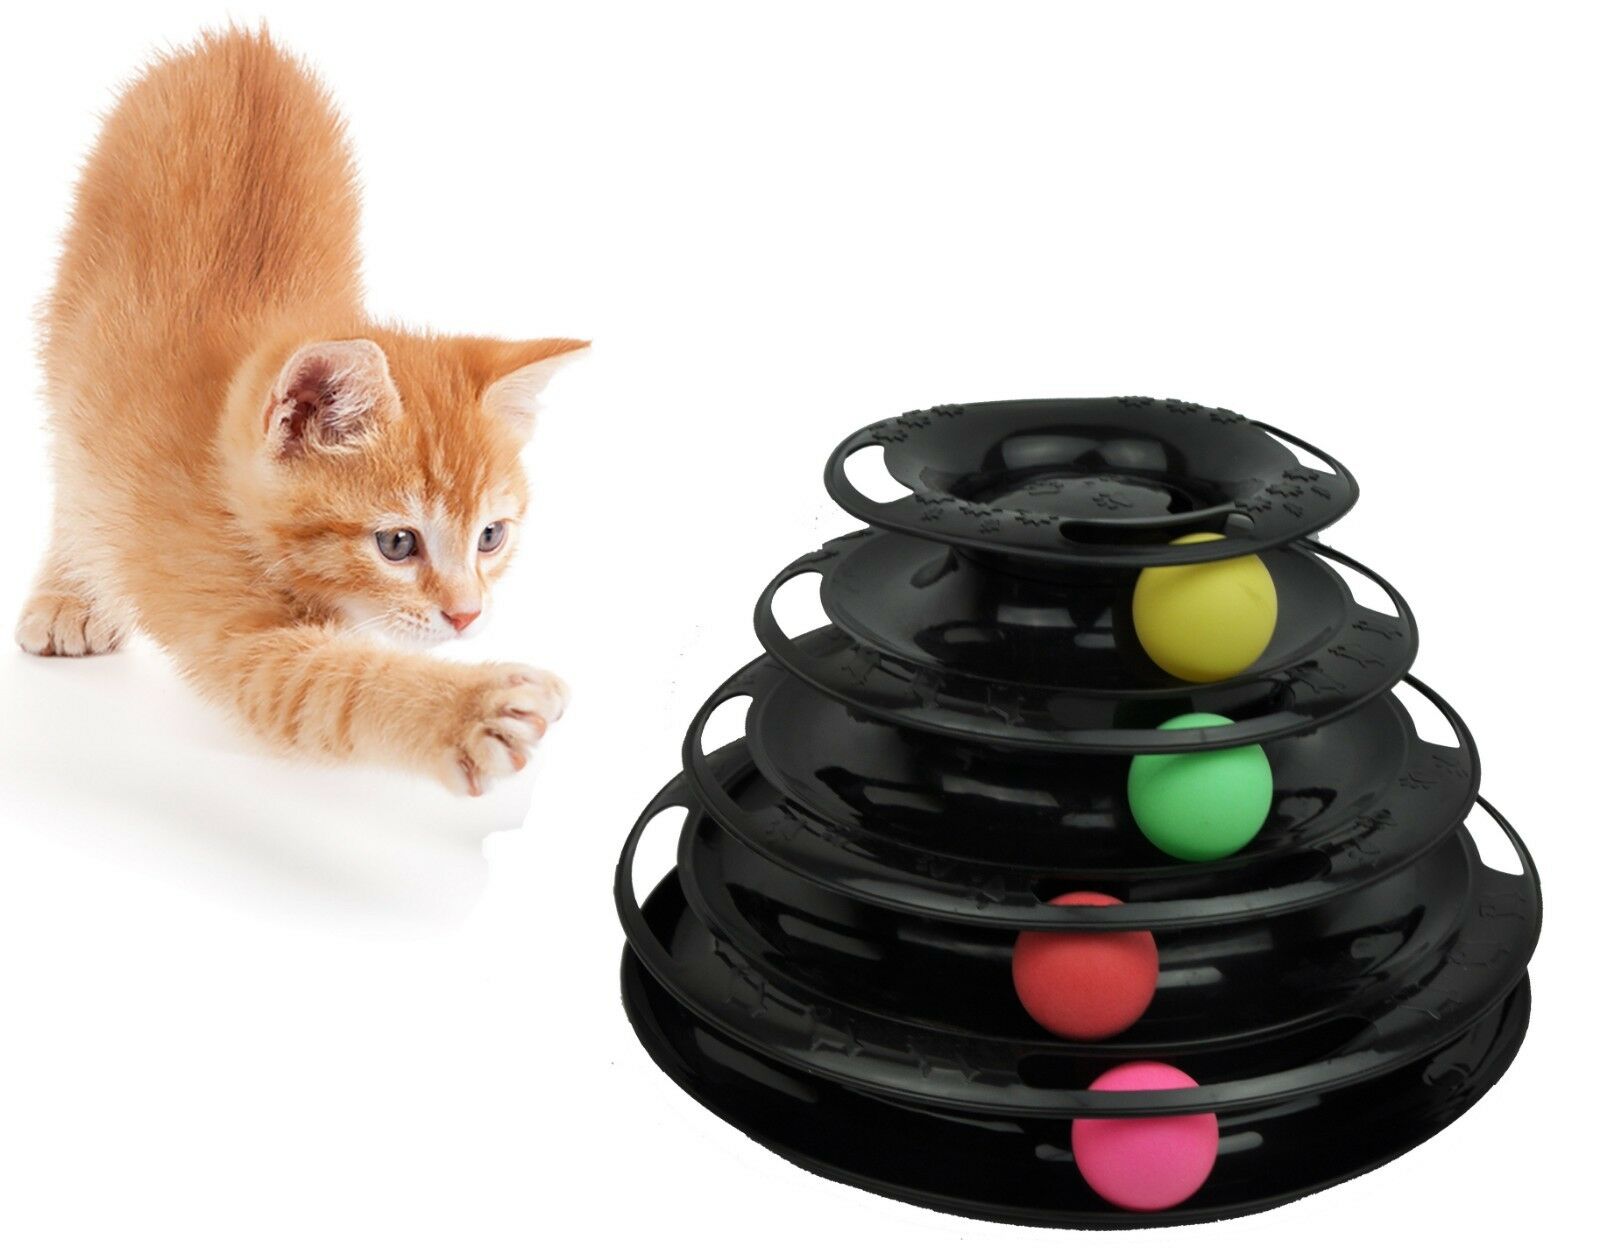 Purrfect Feline Titan's Tower - Interactive Cat Toy New Design 3 Or 4-level